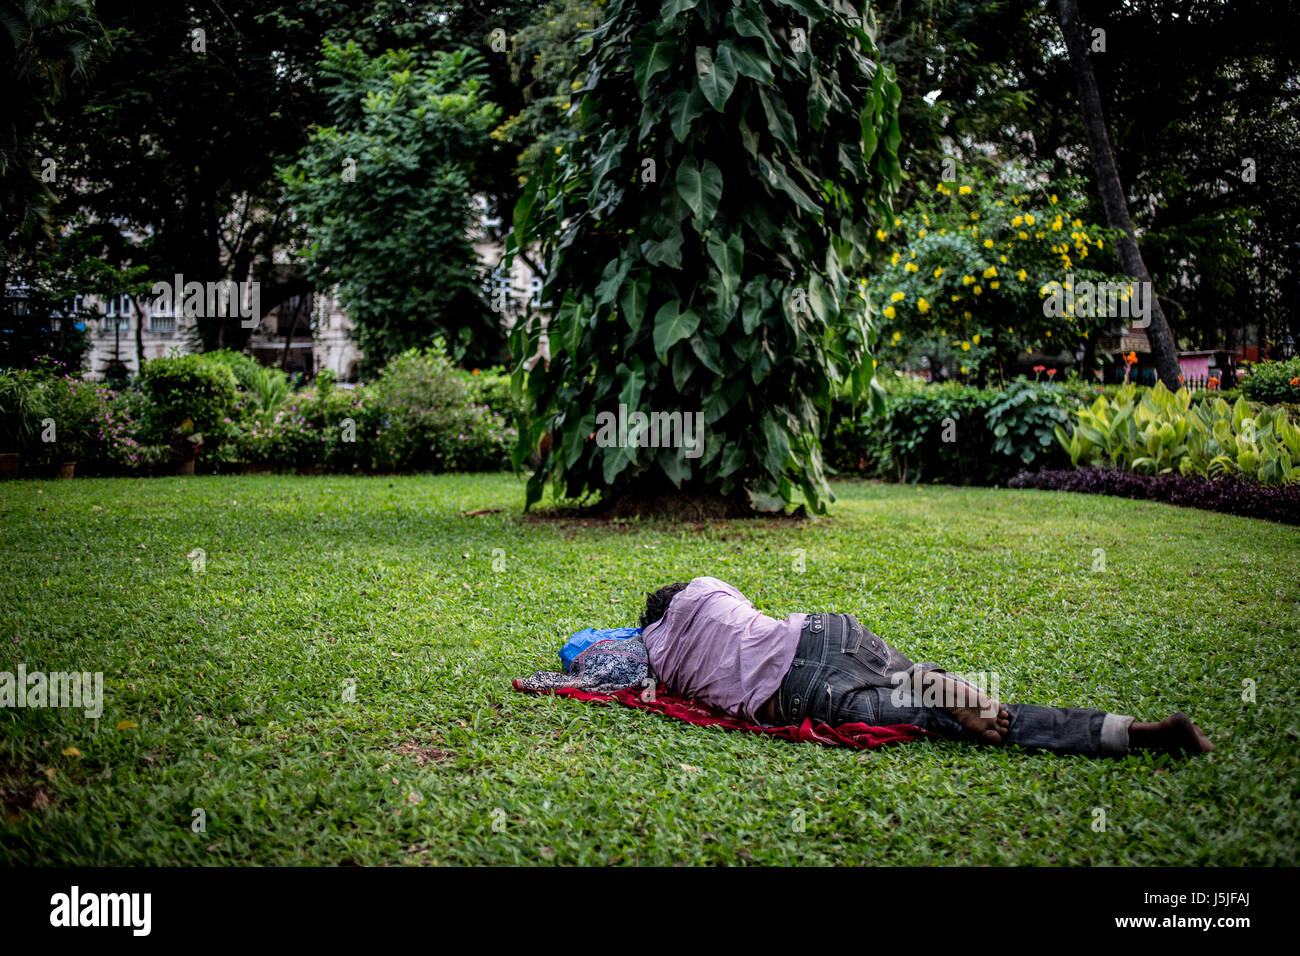 An Indian man taking a nap in a park during the hot hours. Stock Photo